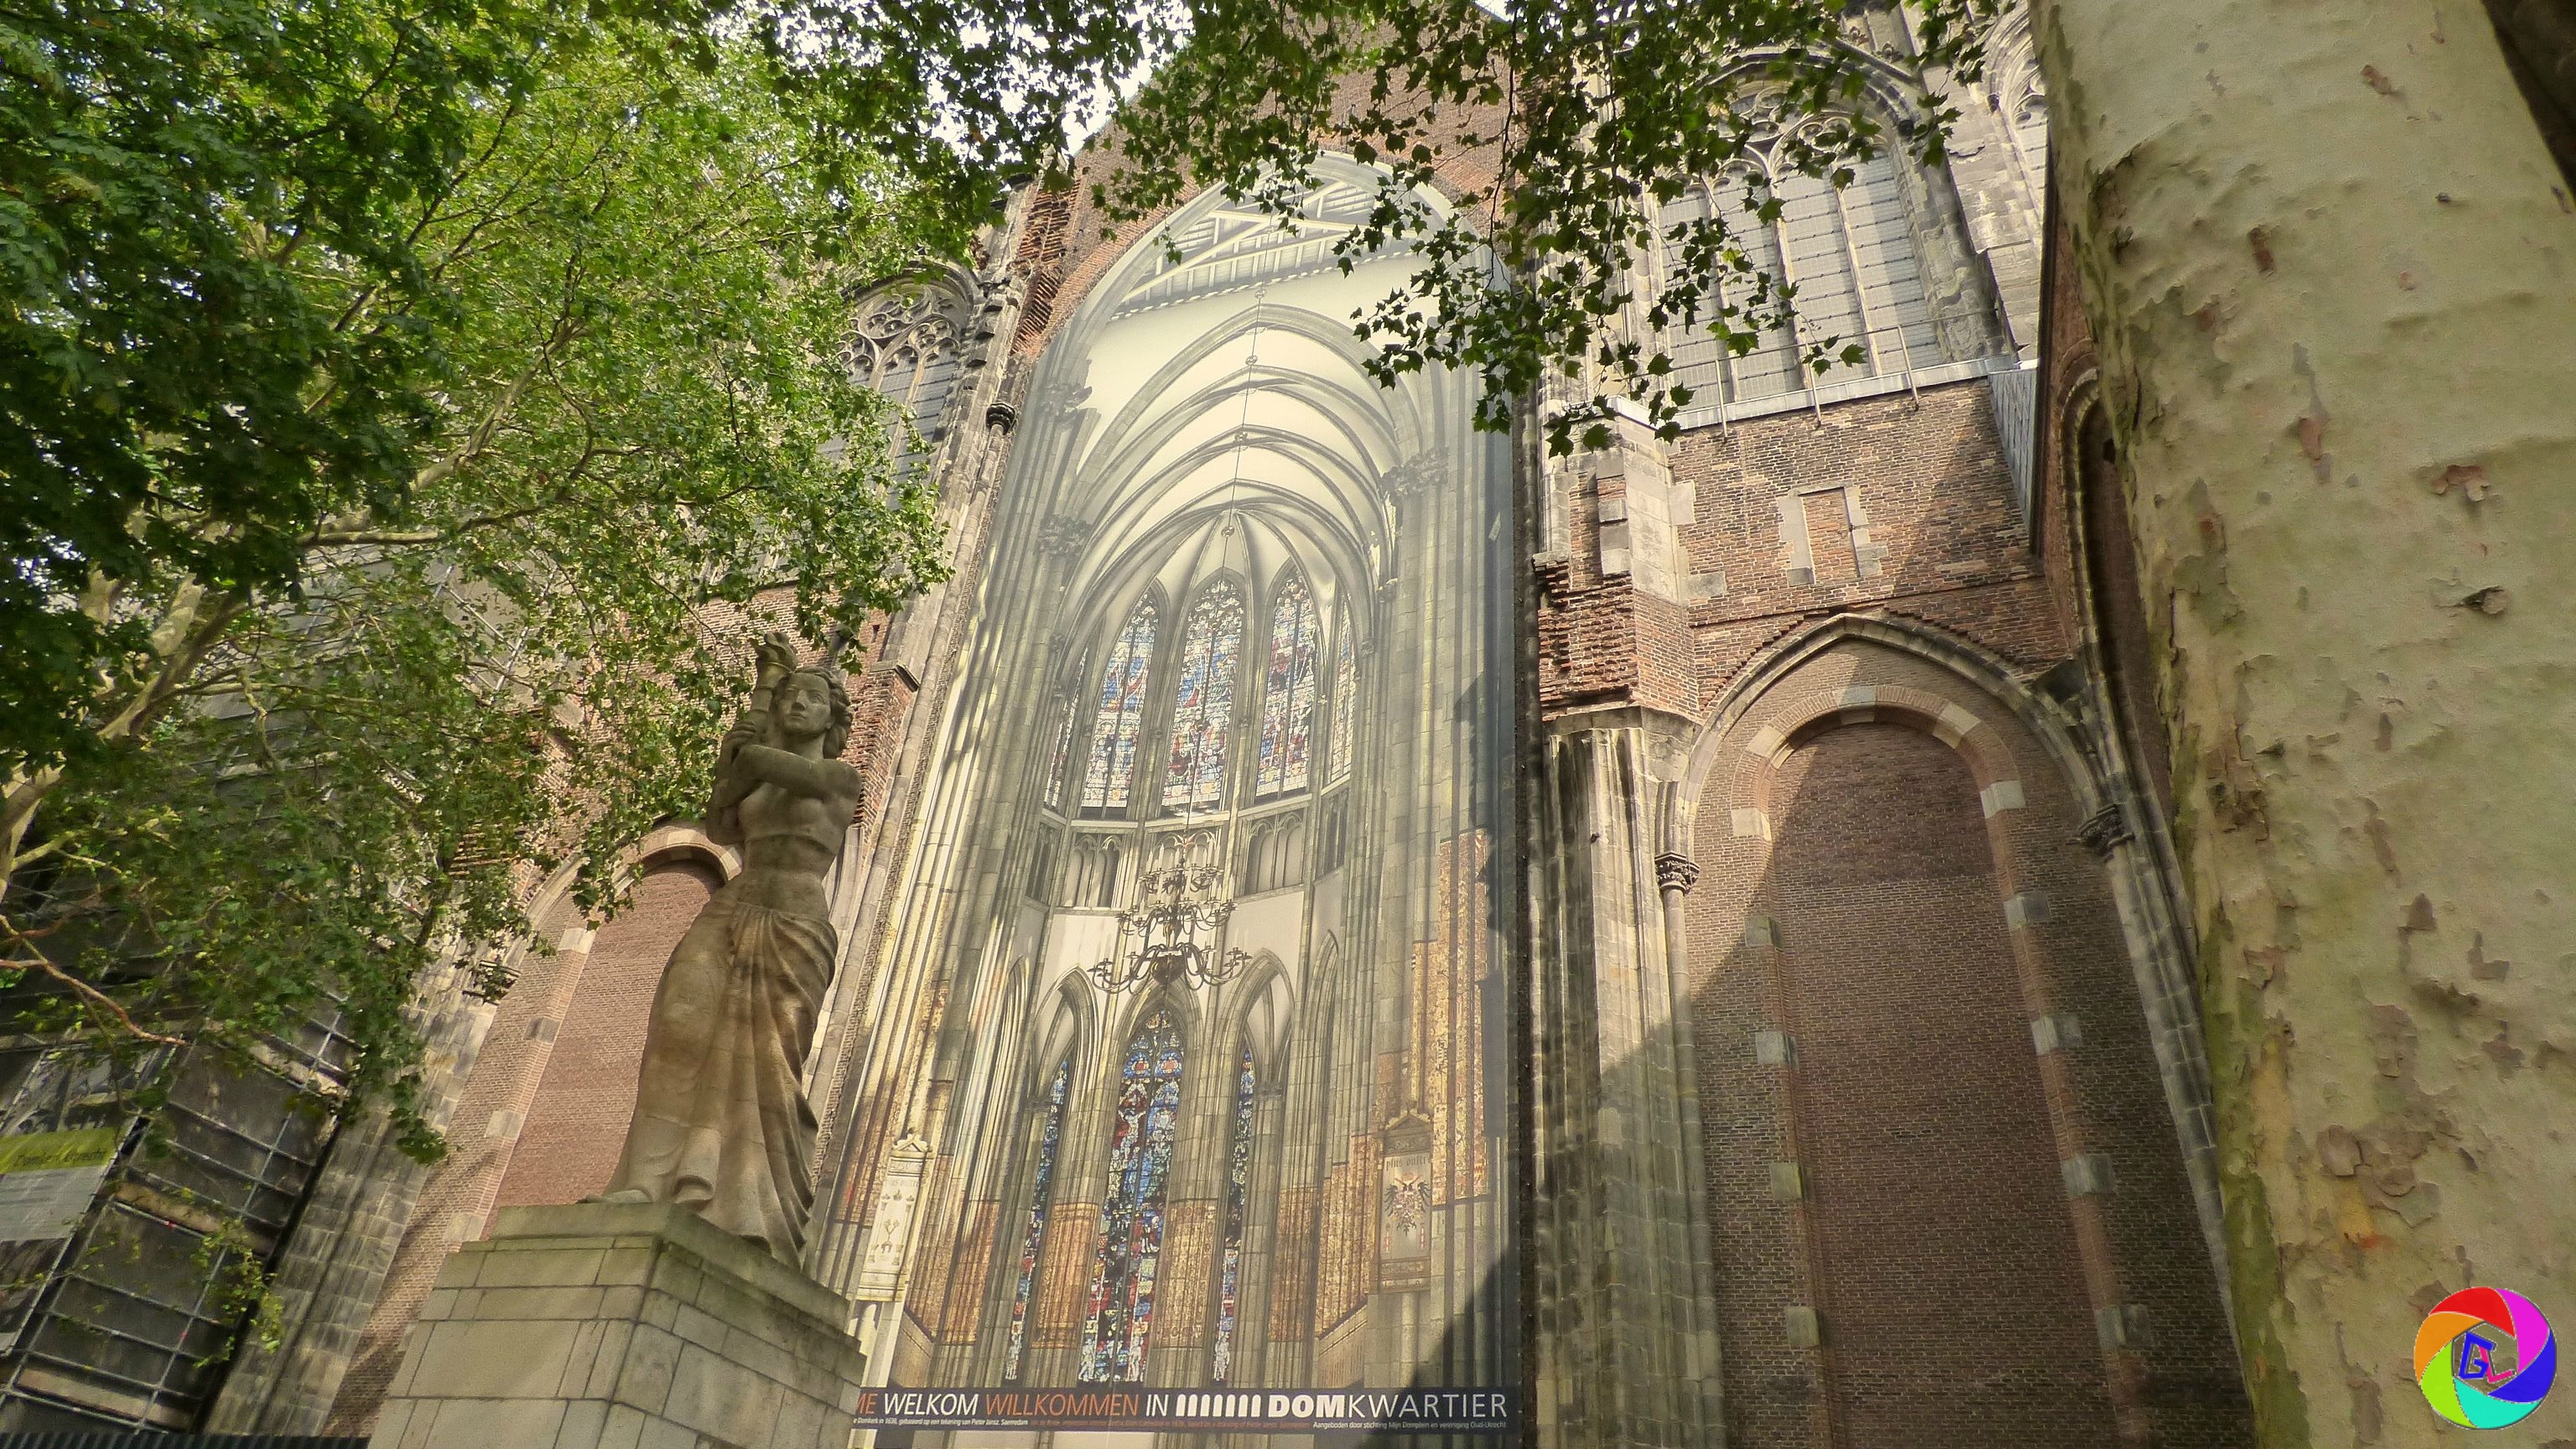 Central part of Cathedral collapsed in storm in 17th Century, brick wall built across gap